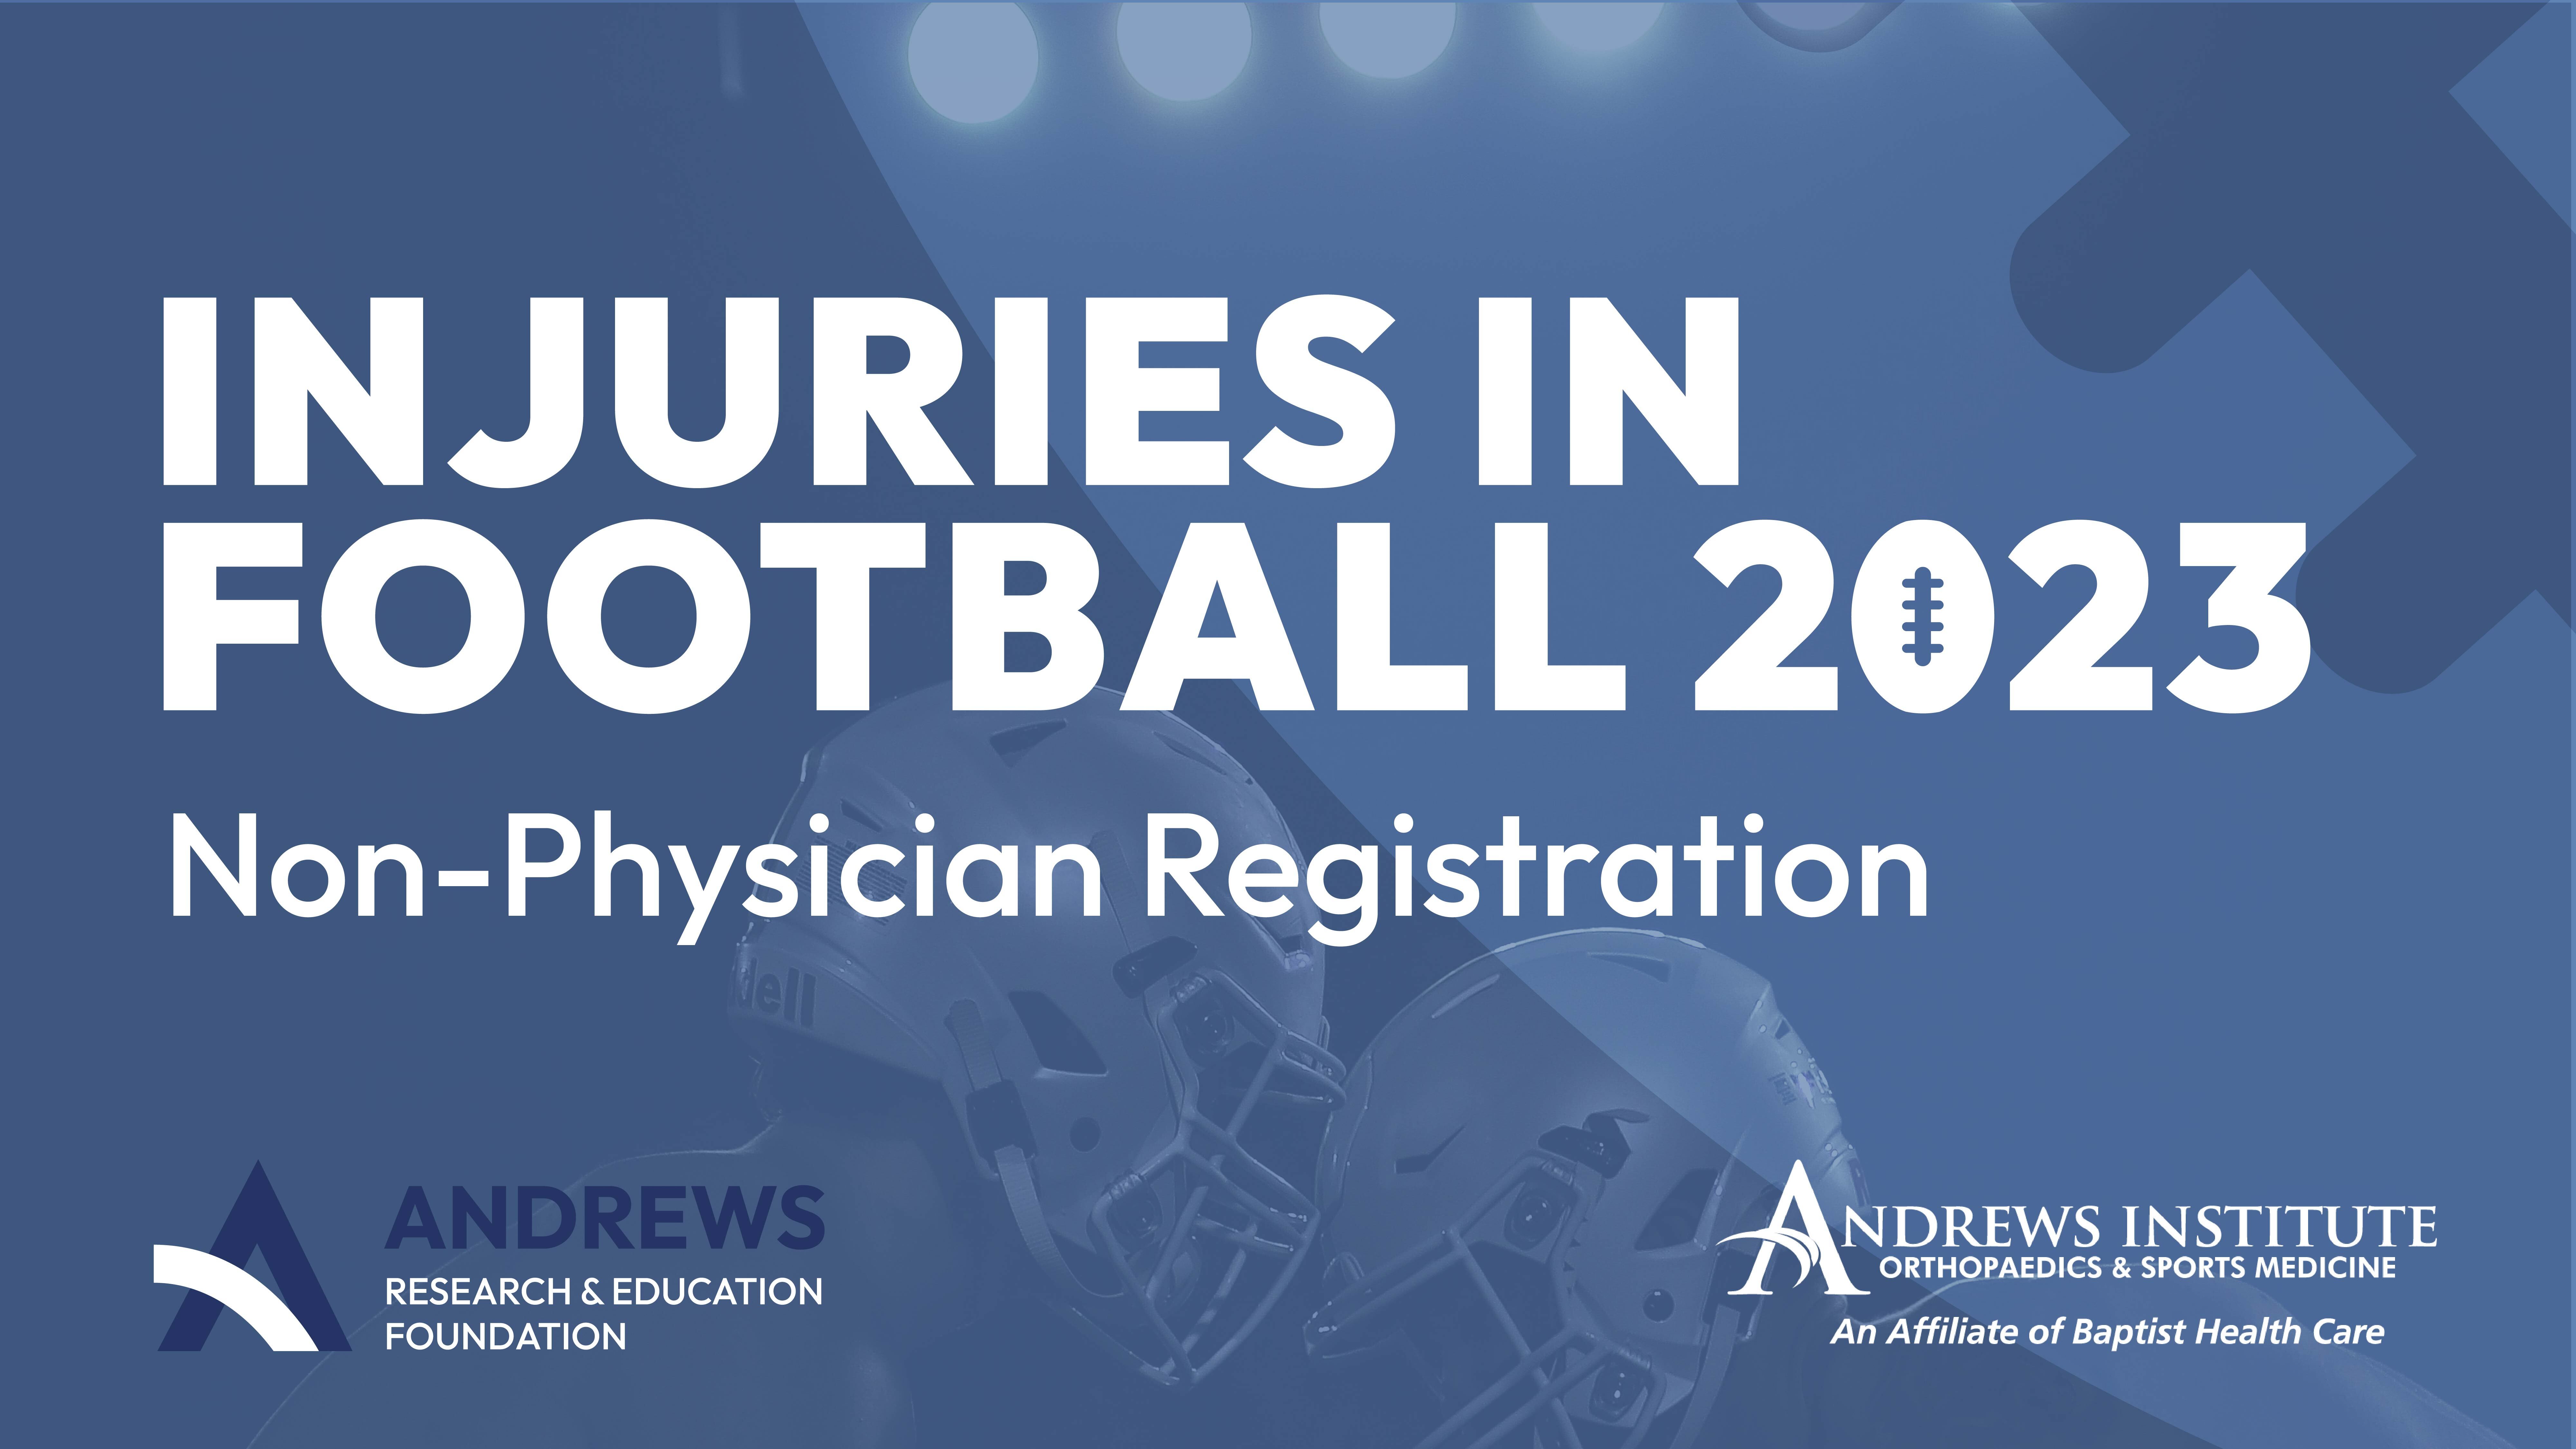 Injuries in Football 2023: Live Conference - Non-Physician